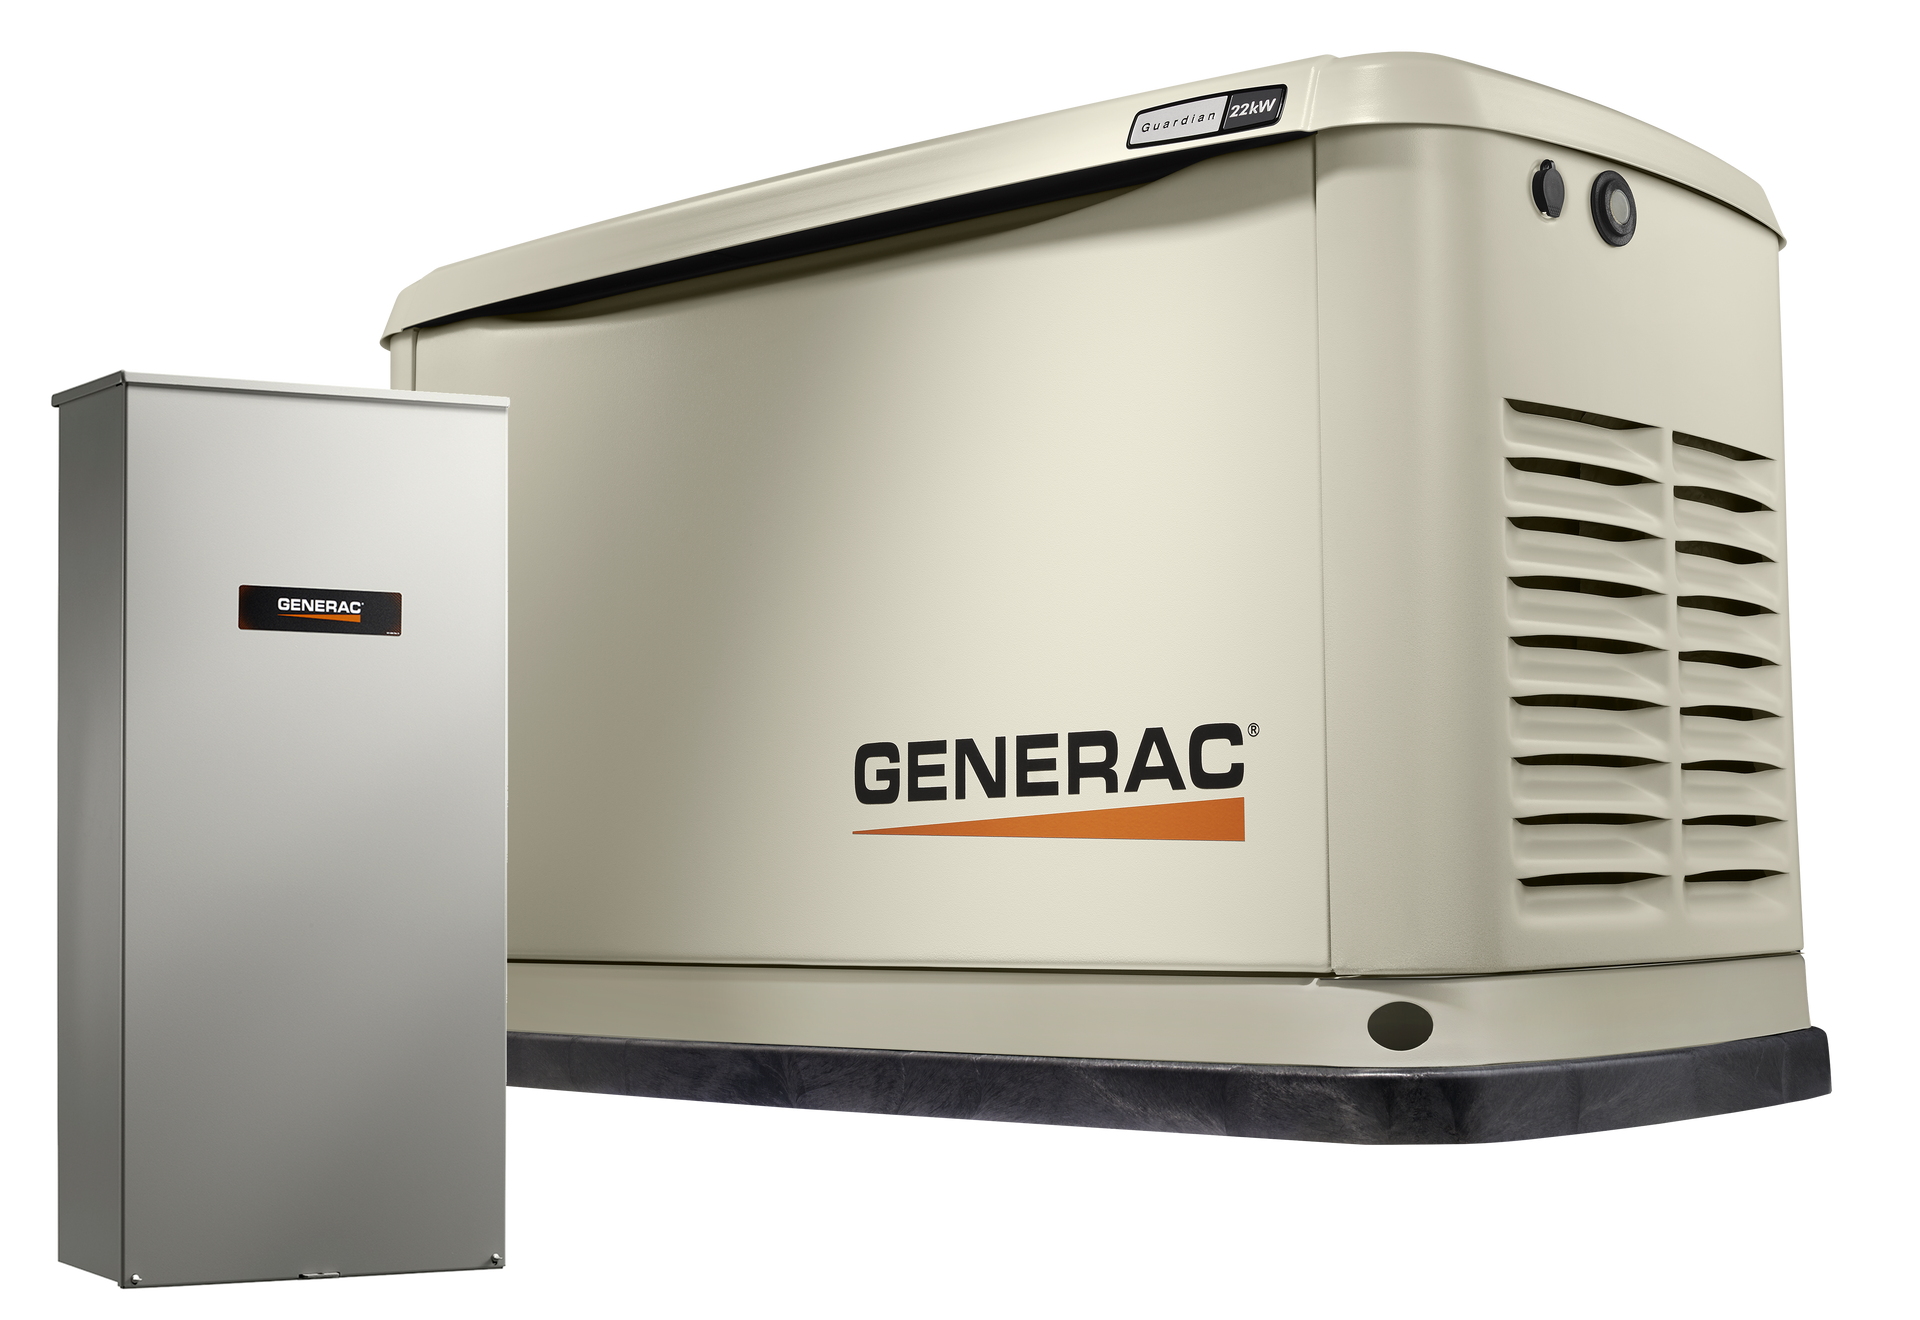 A generac generator is sitting next to a stainless steel box.